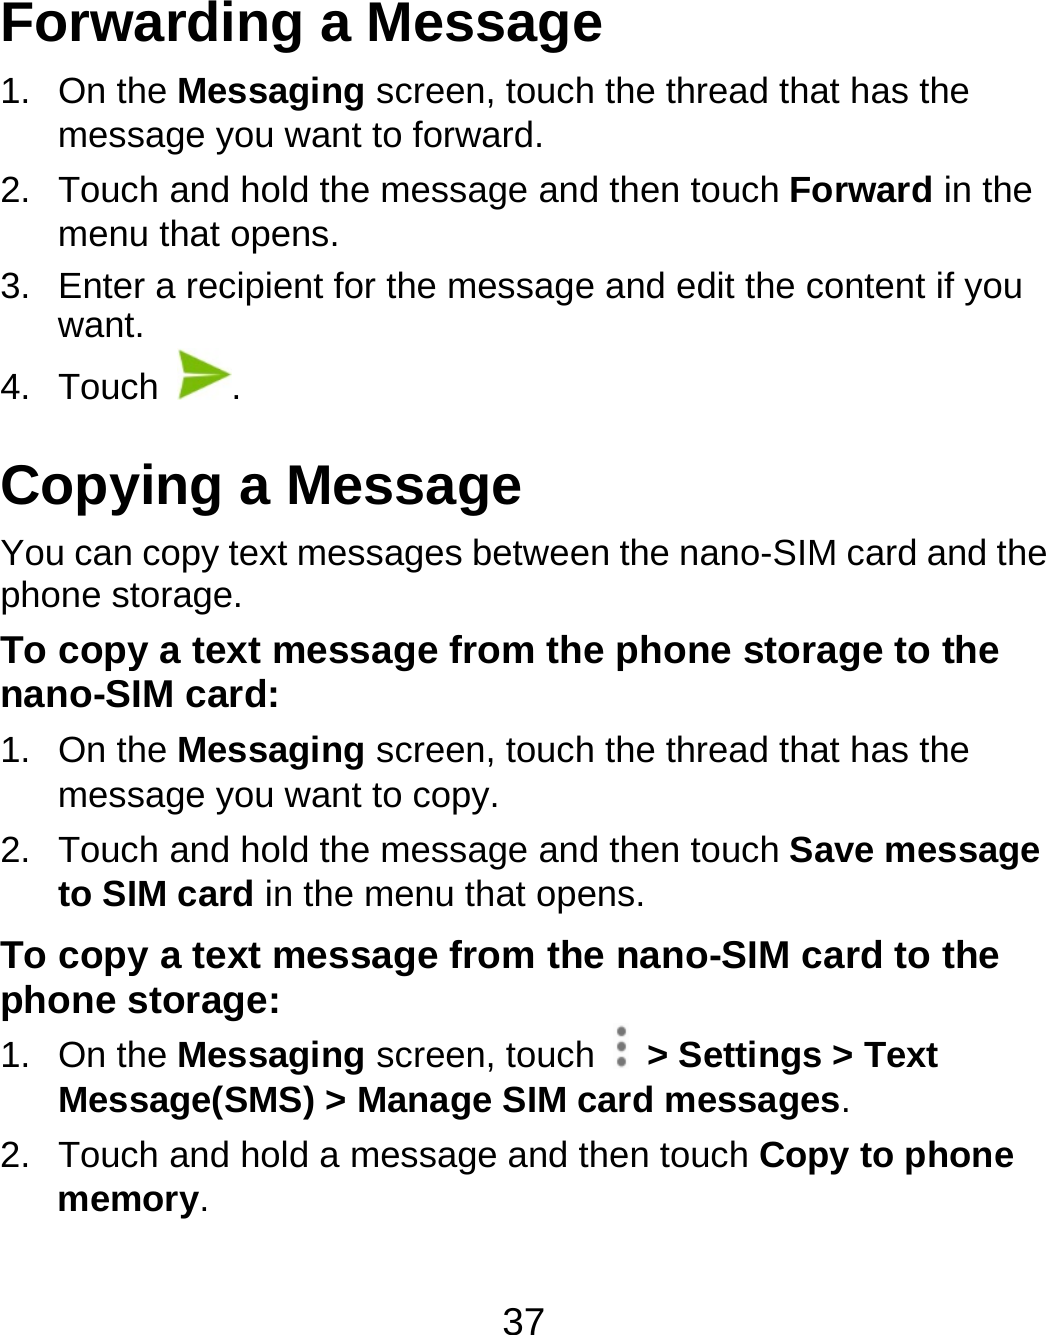 37 Forwarding a Message 1. On the Messaging screen, touch the thread that has the message you want to forward. 2.  Touch and hold the message and then touch Forward in the menu that opens. 3.  Enter a recipient for the message and edit the content if you want. 4. Touch  . Copying a Message You can copy text messages between the nano-SIM card and the phone storage. To copy a text message from the phone storage to the nano-SIM card: 1. On the Messaging screen, touch the thread that has the message you want to copy. 2.  Touch and hold the message and then touch Save message to SIM card in the menu that opens. To copy a text message from the nano-SIM card to the phone storage: 1. On the Messaging screen, touch    &gt; Settings &gt; Text Message(SMS) &gt; Manage SIM card messages. 2.  Touch and hold a message and then touch Copy to phone memory. 